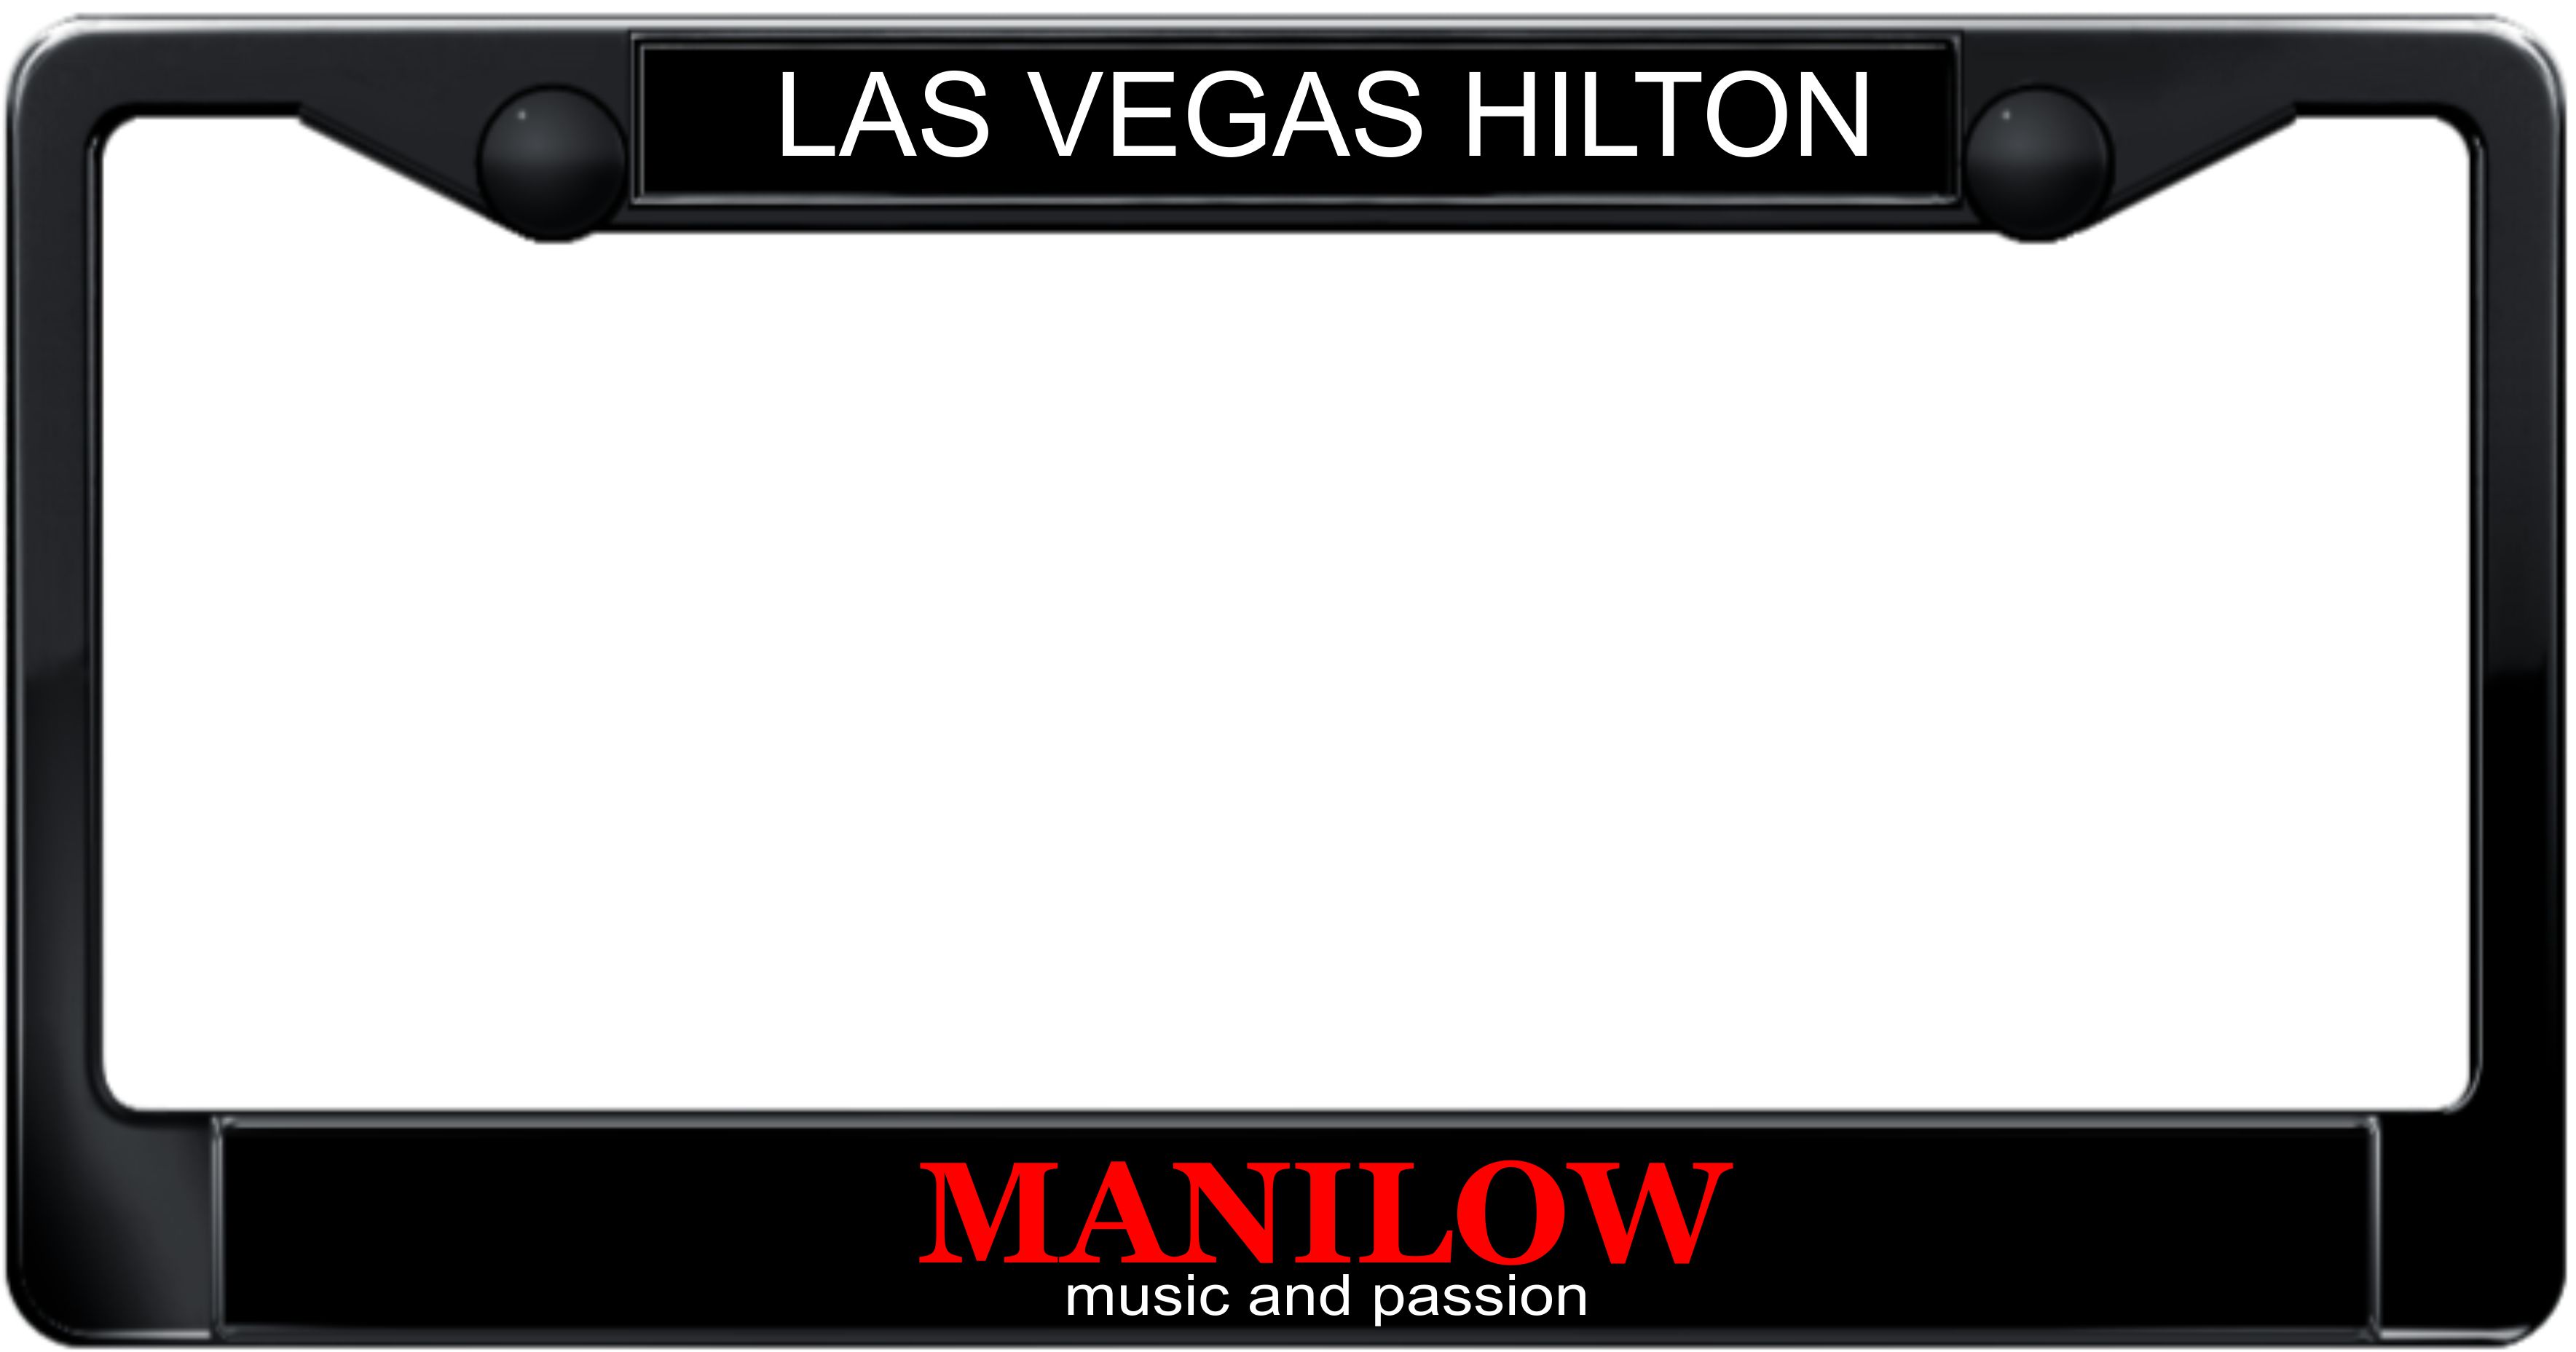 Manilow plastic personalized license plate frame 